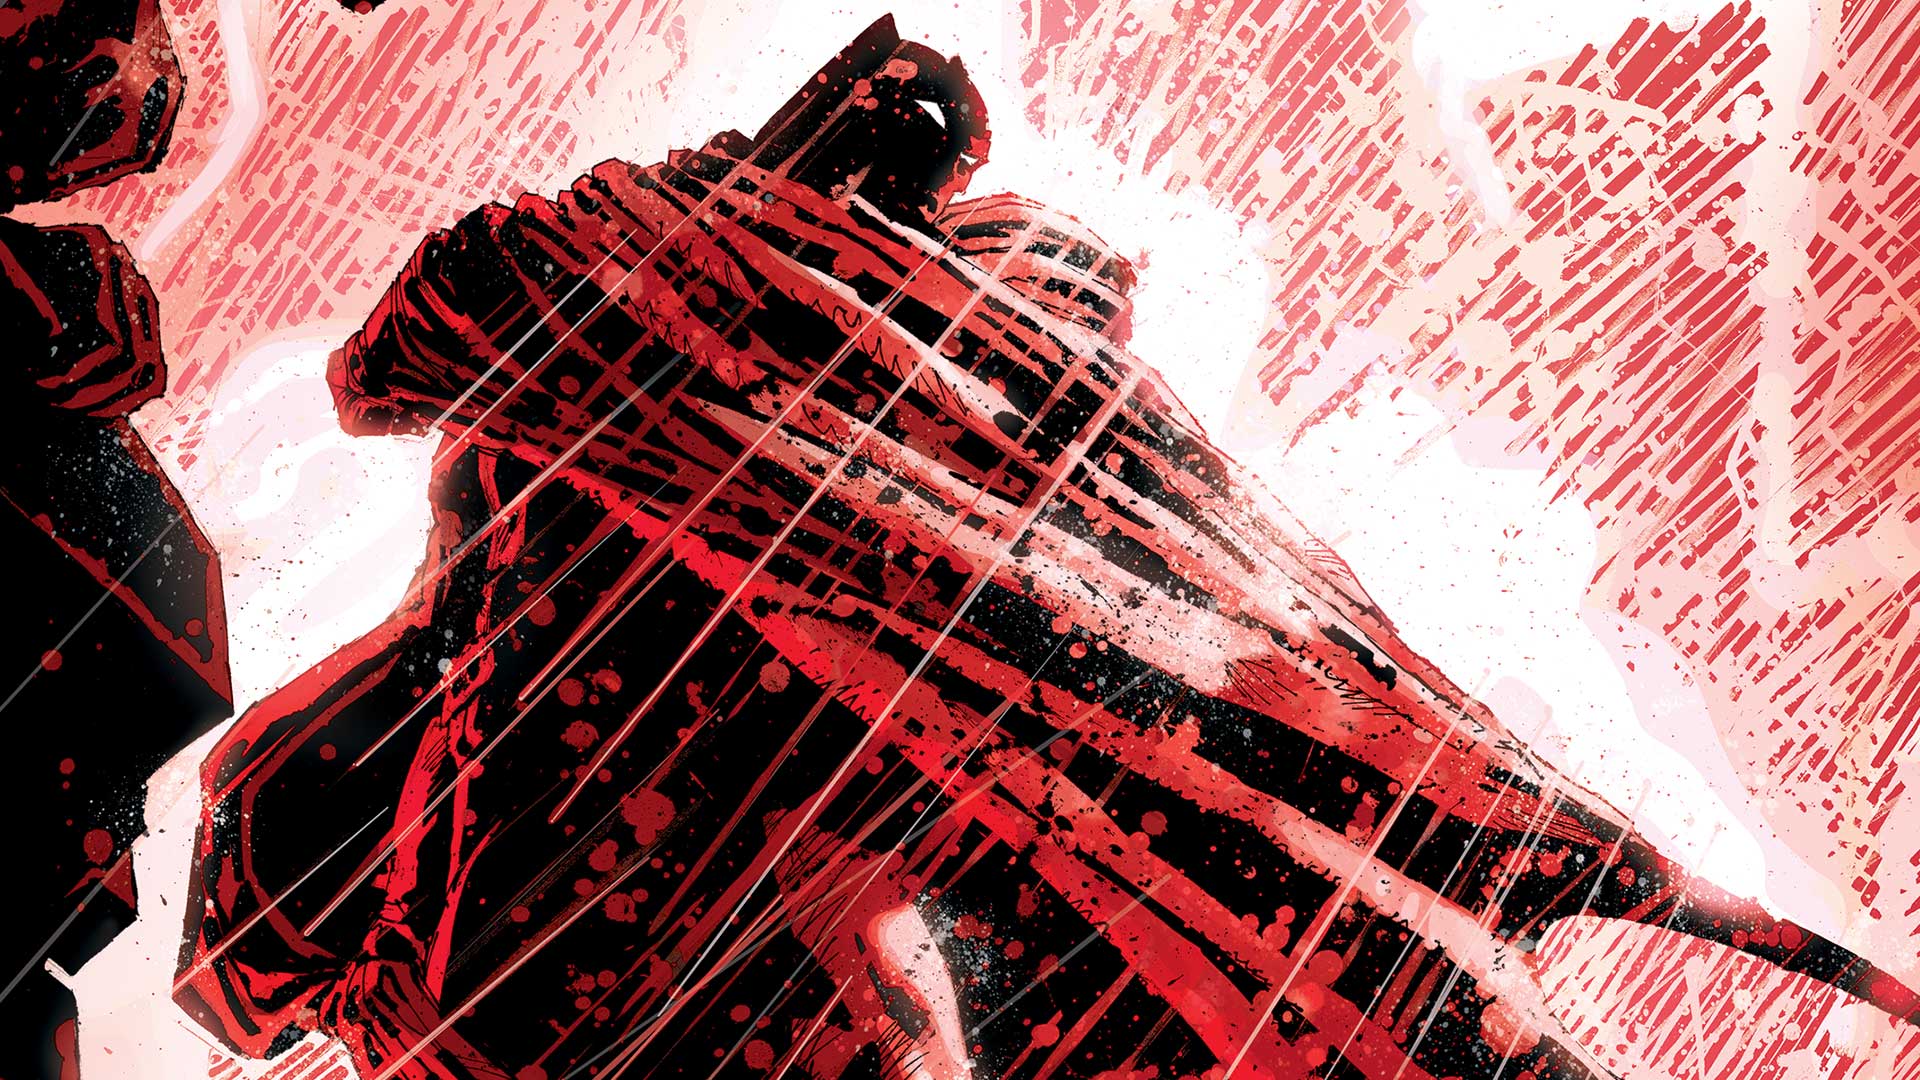 Dark Knight III: The Master Race #9 Review